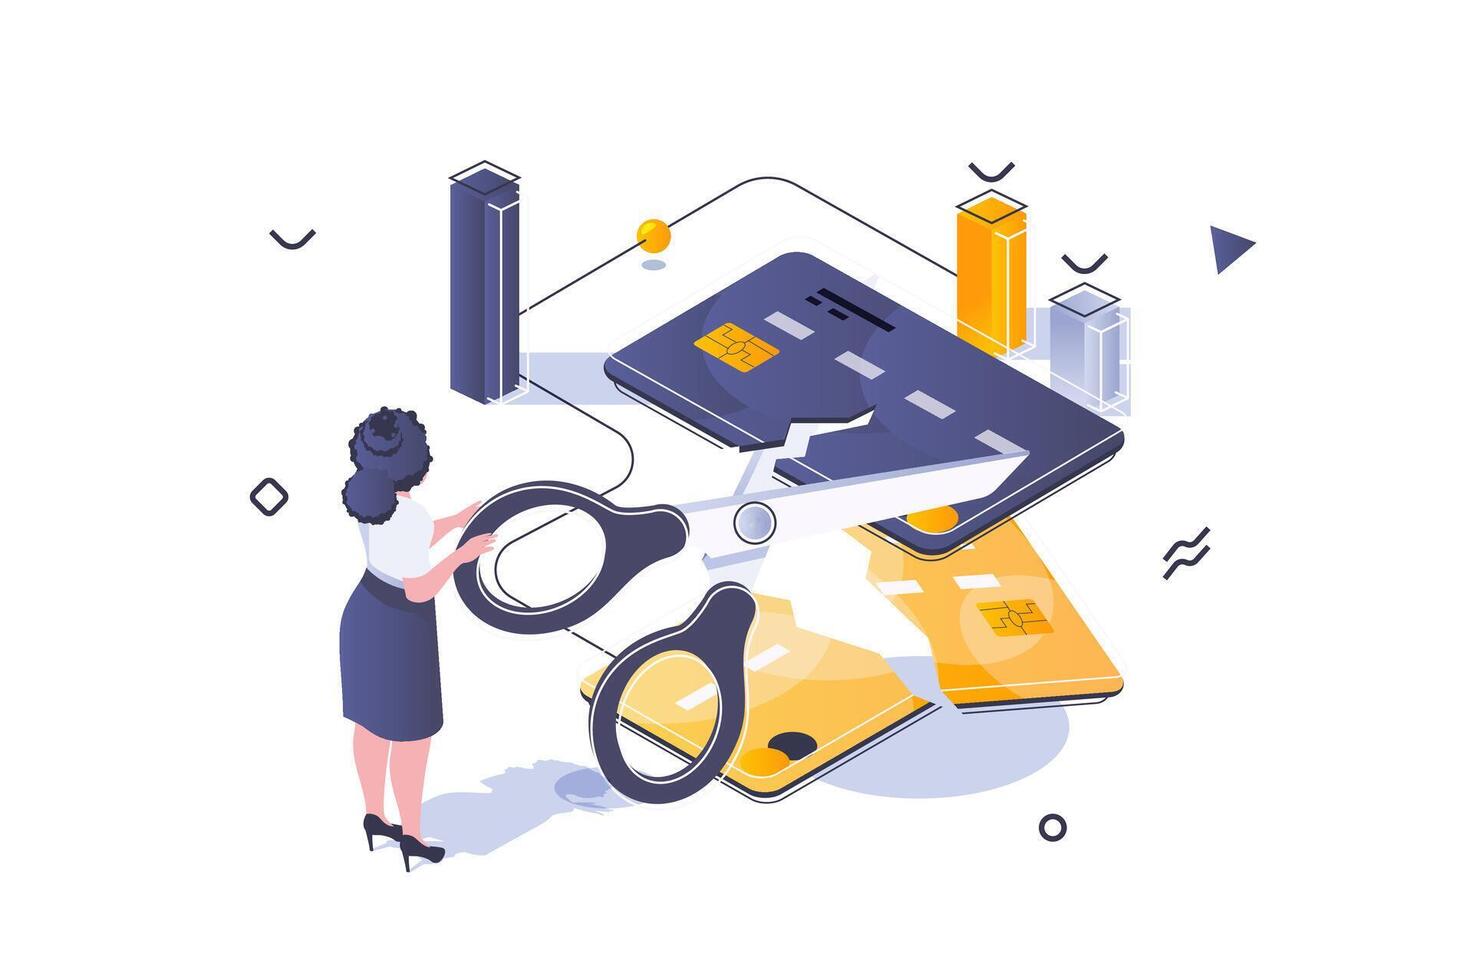 Unemployment crisis concept in 3d isometric design. Woman cutting credit cards, loses her savings, bankruptcy and financial problem. Vector illustration with isometric people scene for web graphic